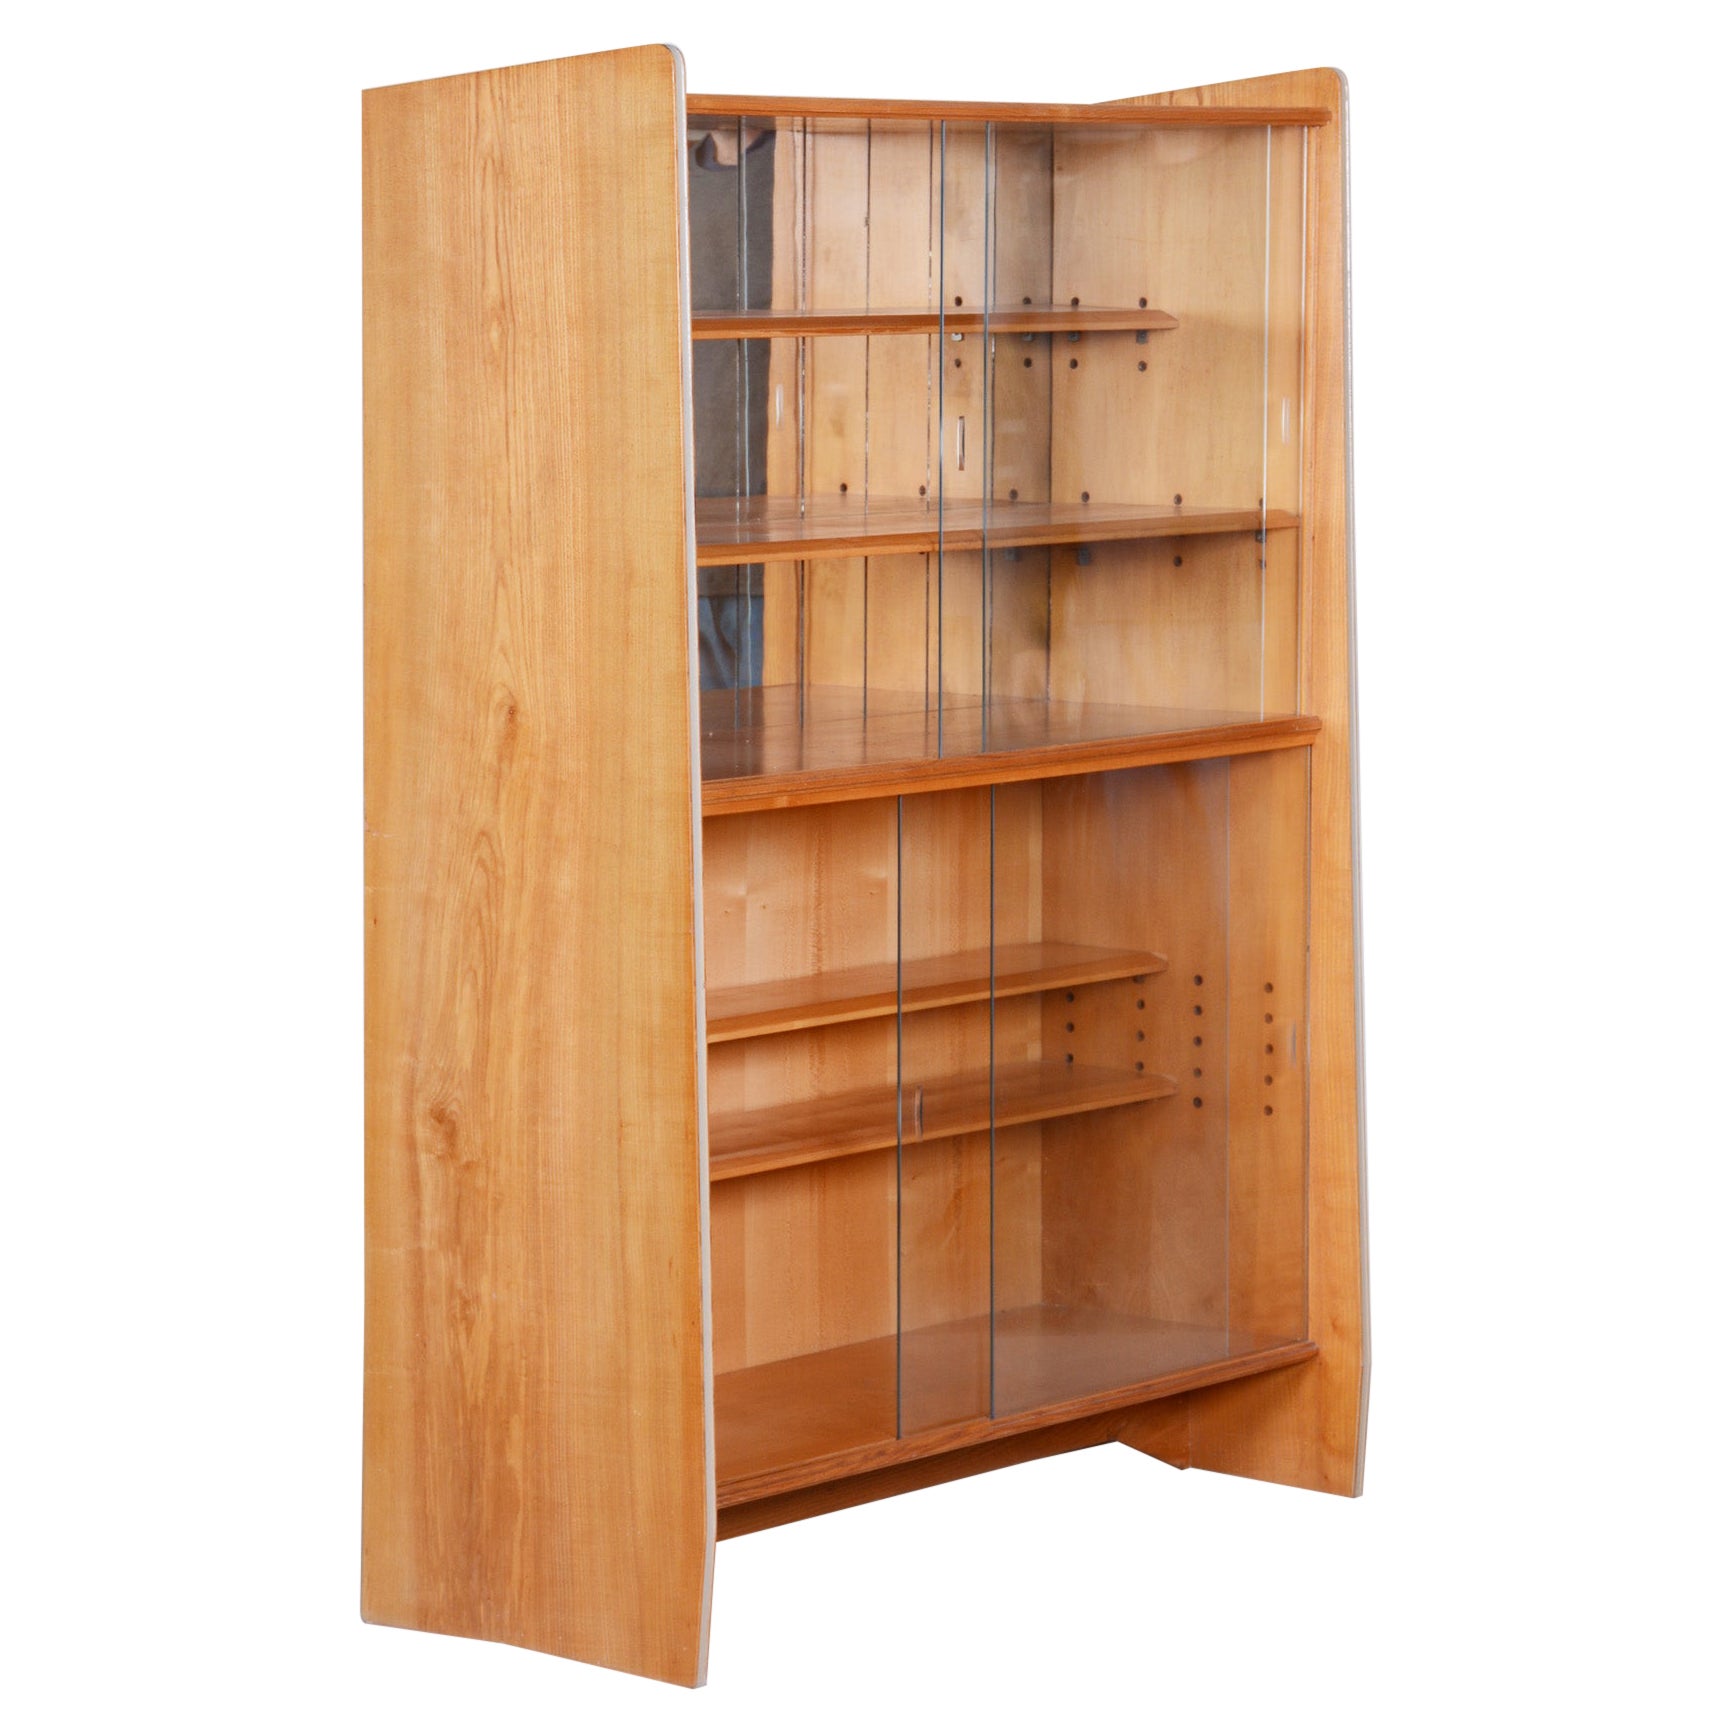 Unique Czech Ash Mid-Century Bookcase, 1950s, Well Preserved Condition For Sale